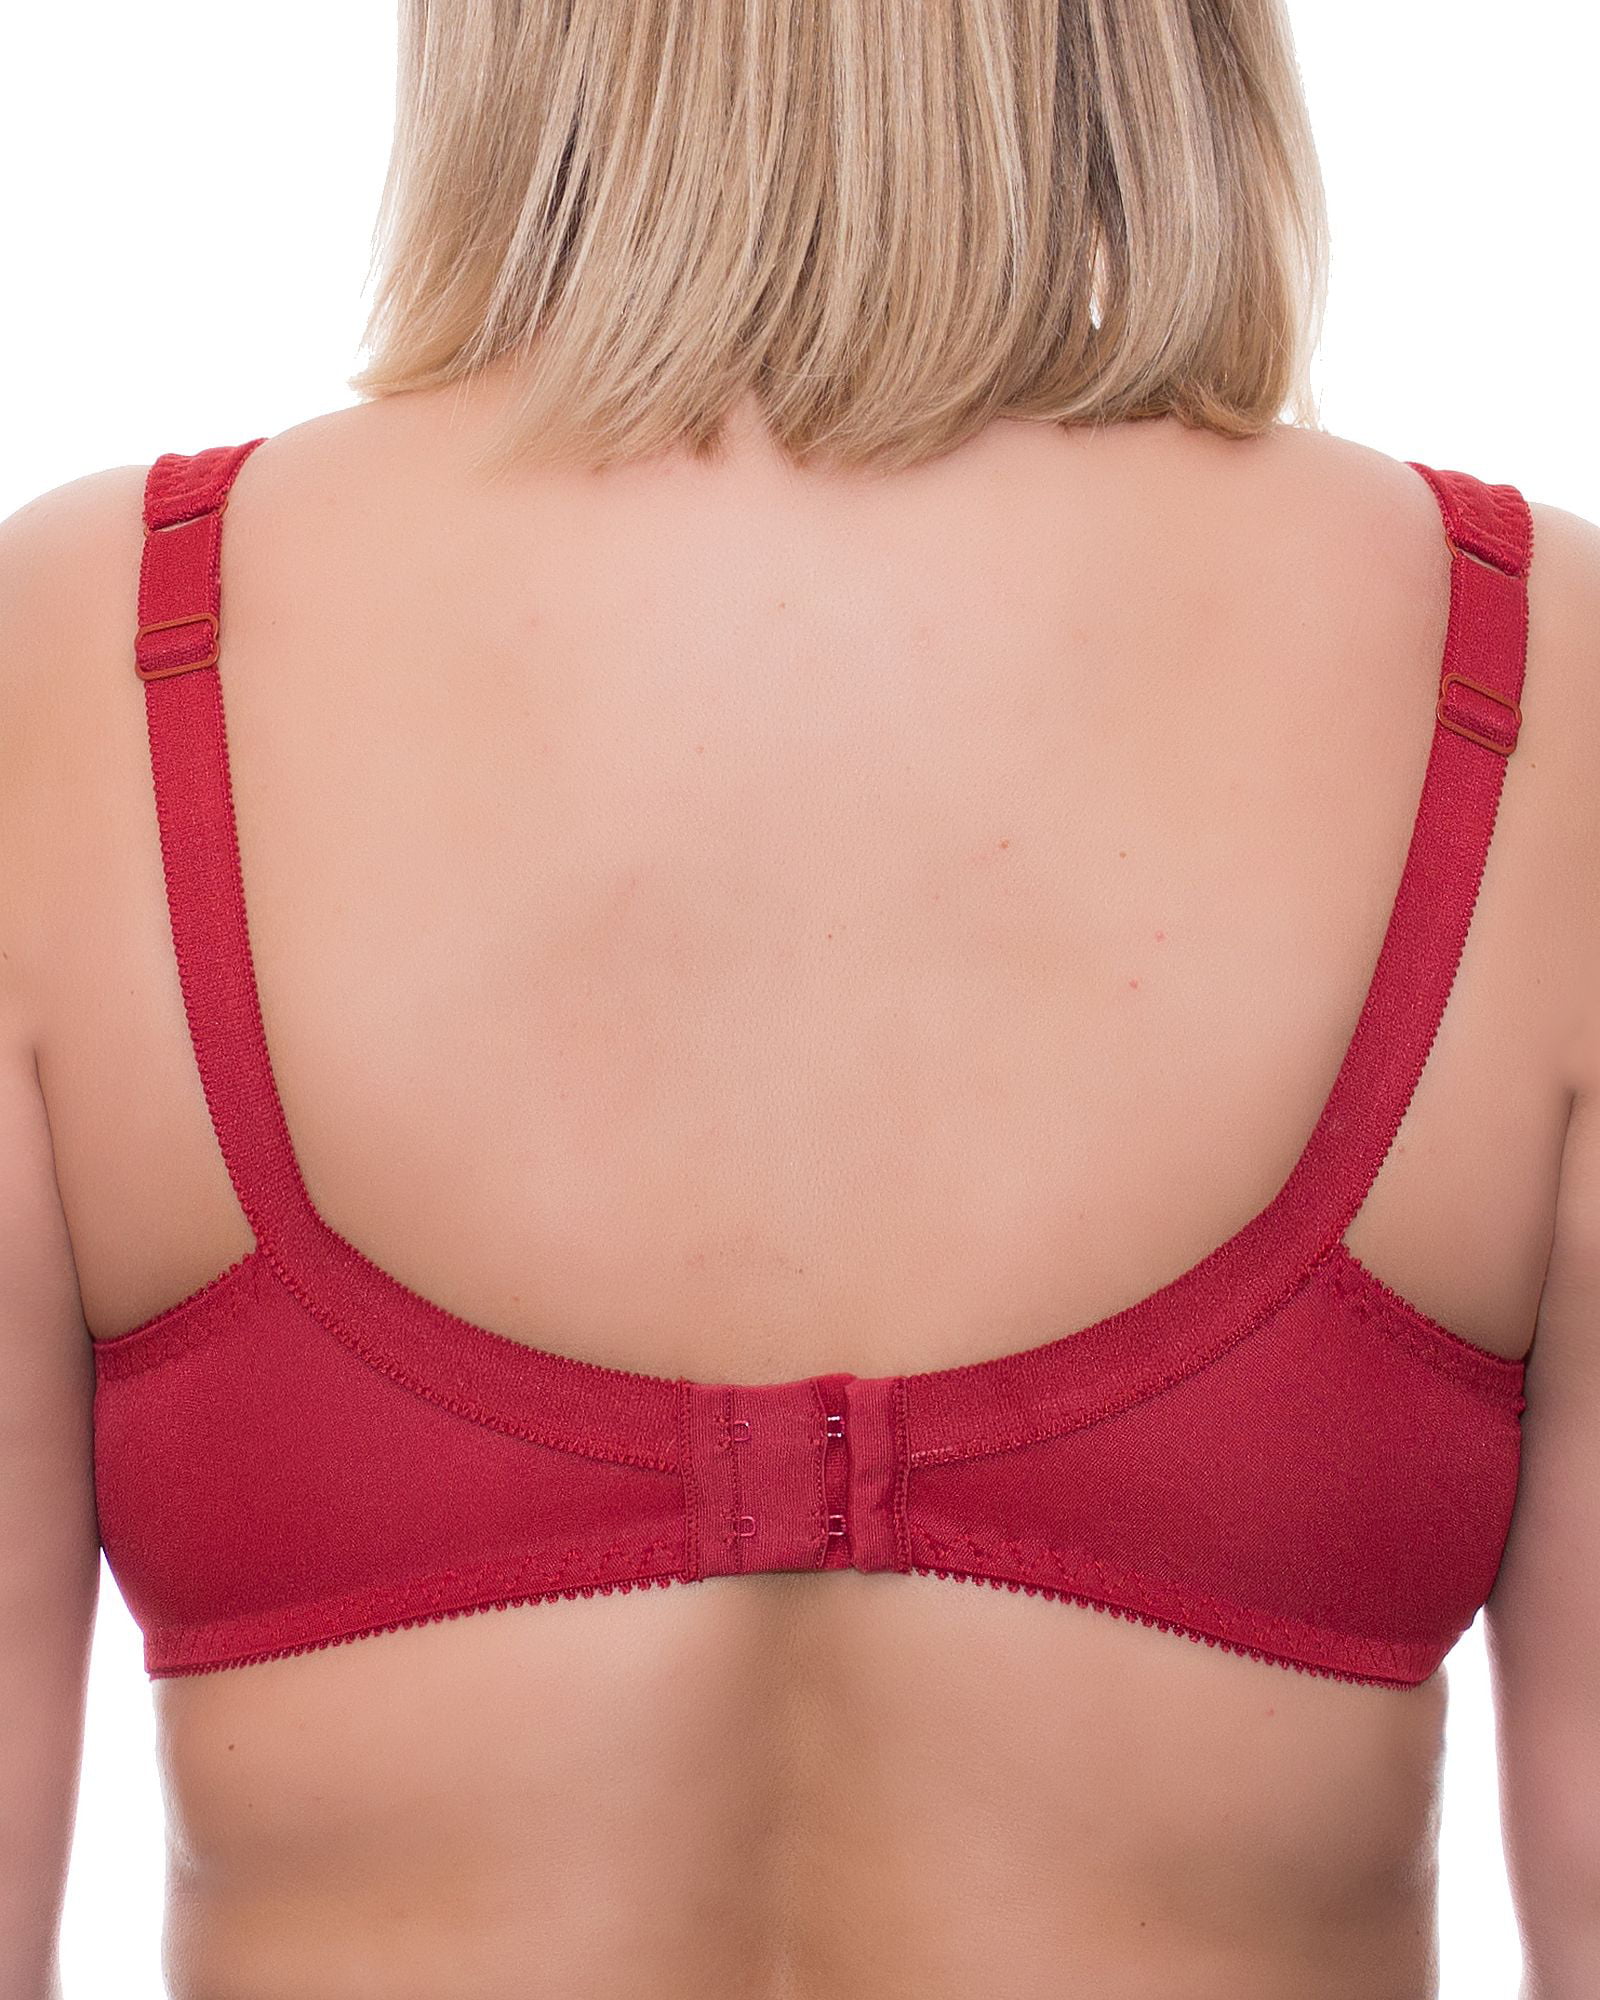 Cheeky Intimate Apparel Boutique - OPERATION BETTER BRA FIT - From a 44DD  bra size (left image) to a 36O bra size (right image). For so many women  their bra fit journey